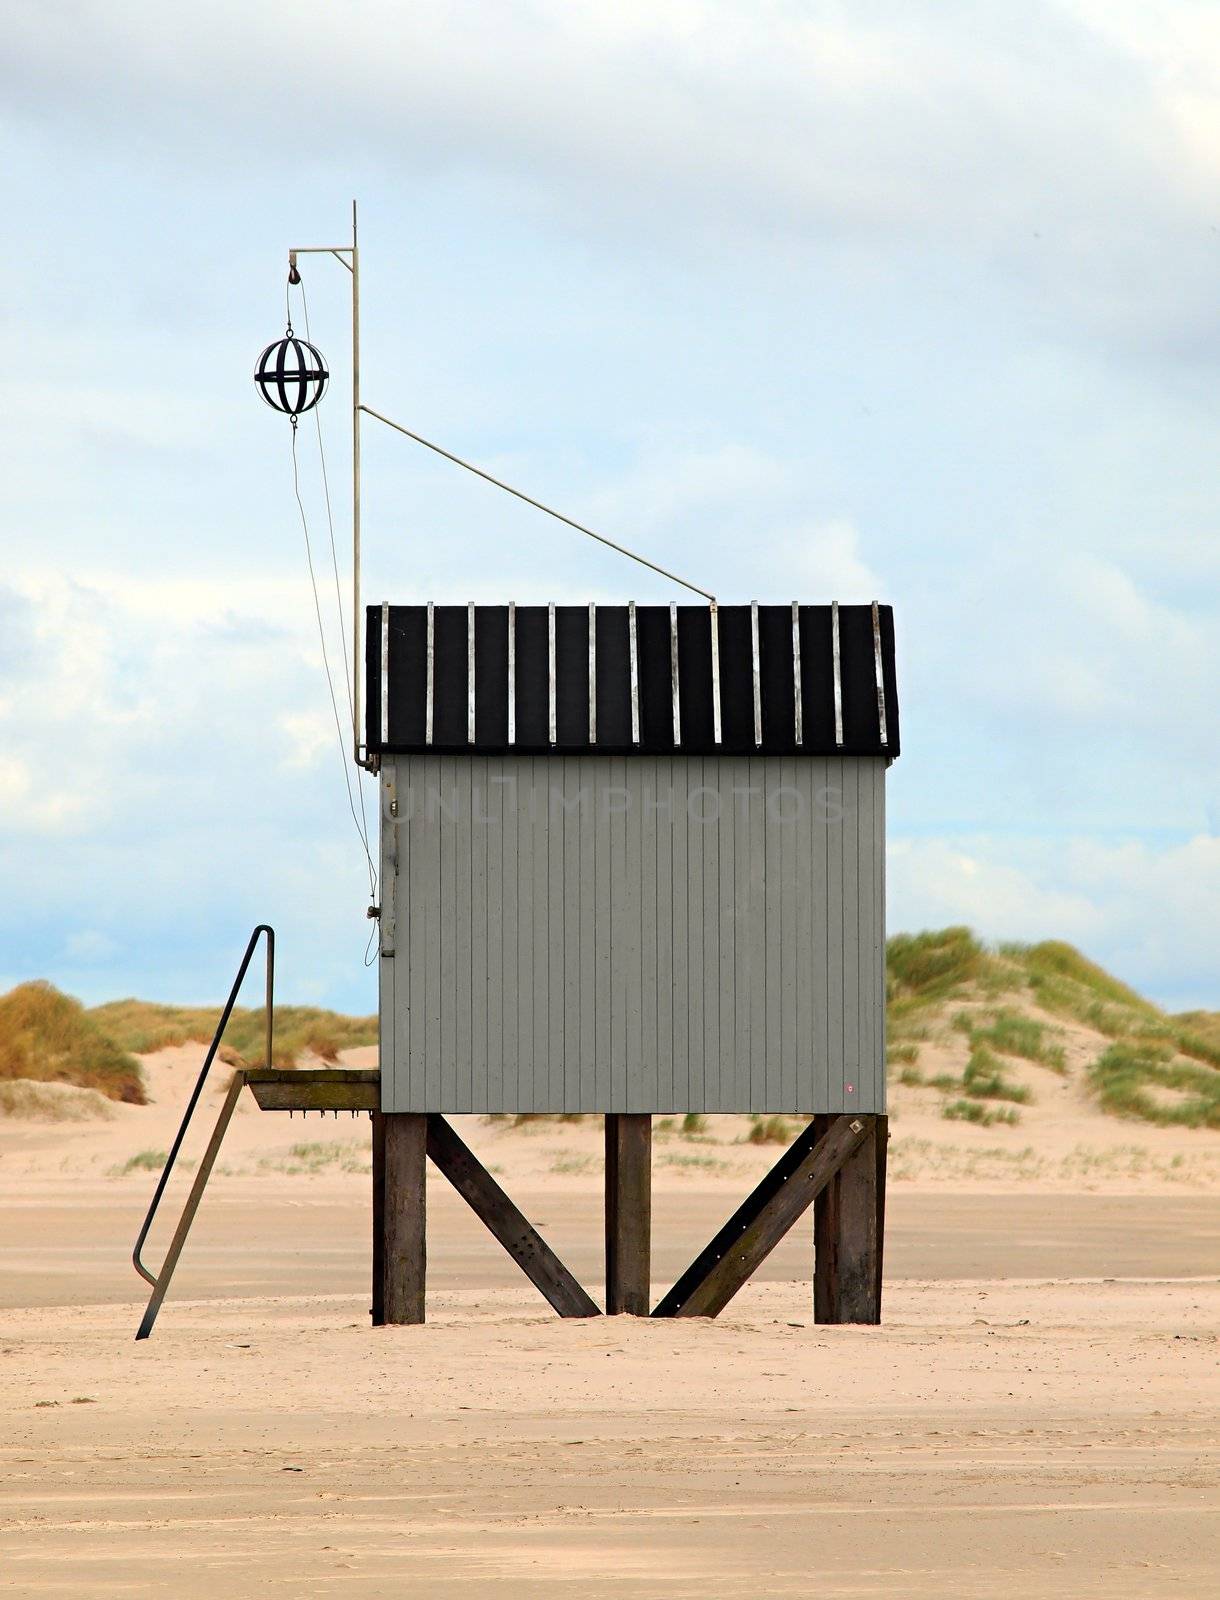 Image of a shed on the beach